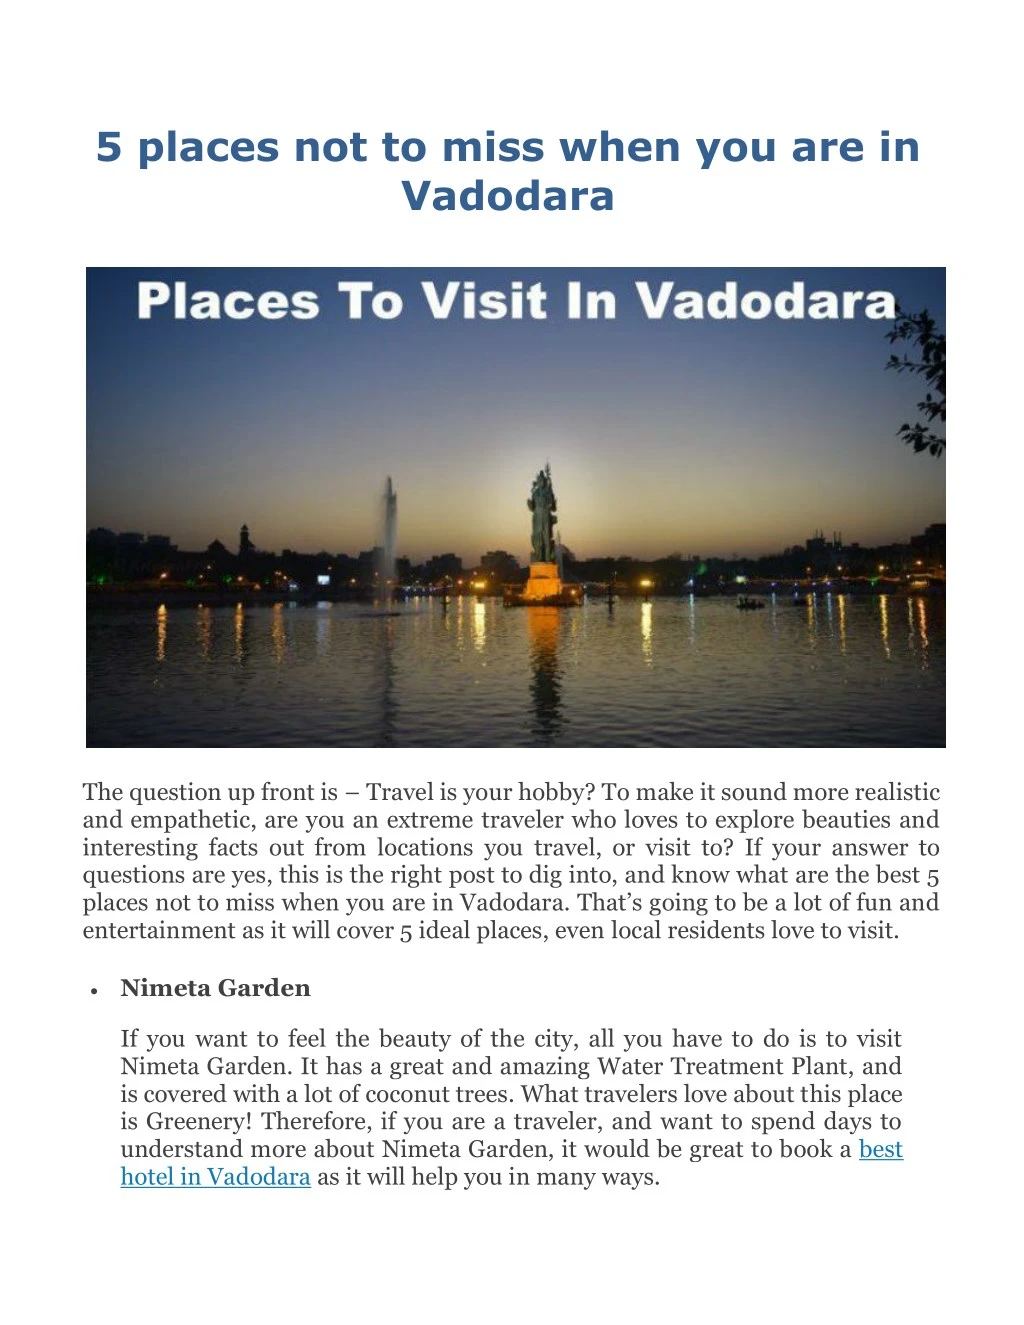 5 places not to miss when you are in vadodara